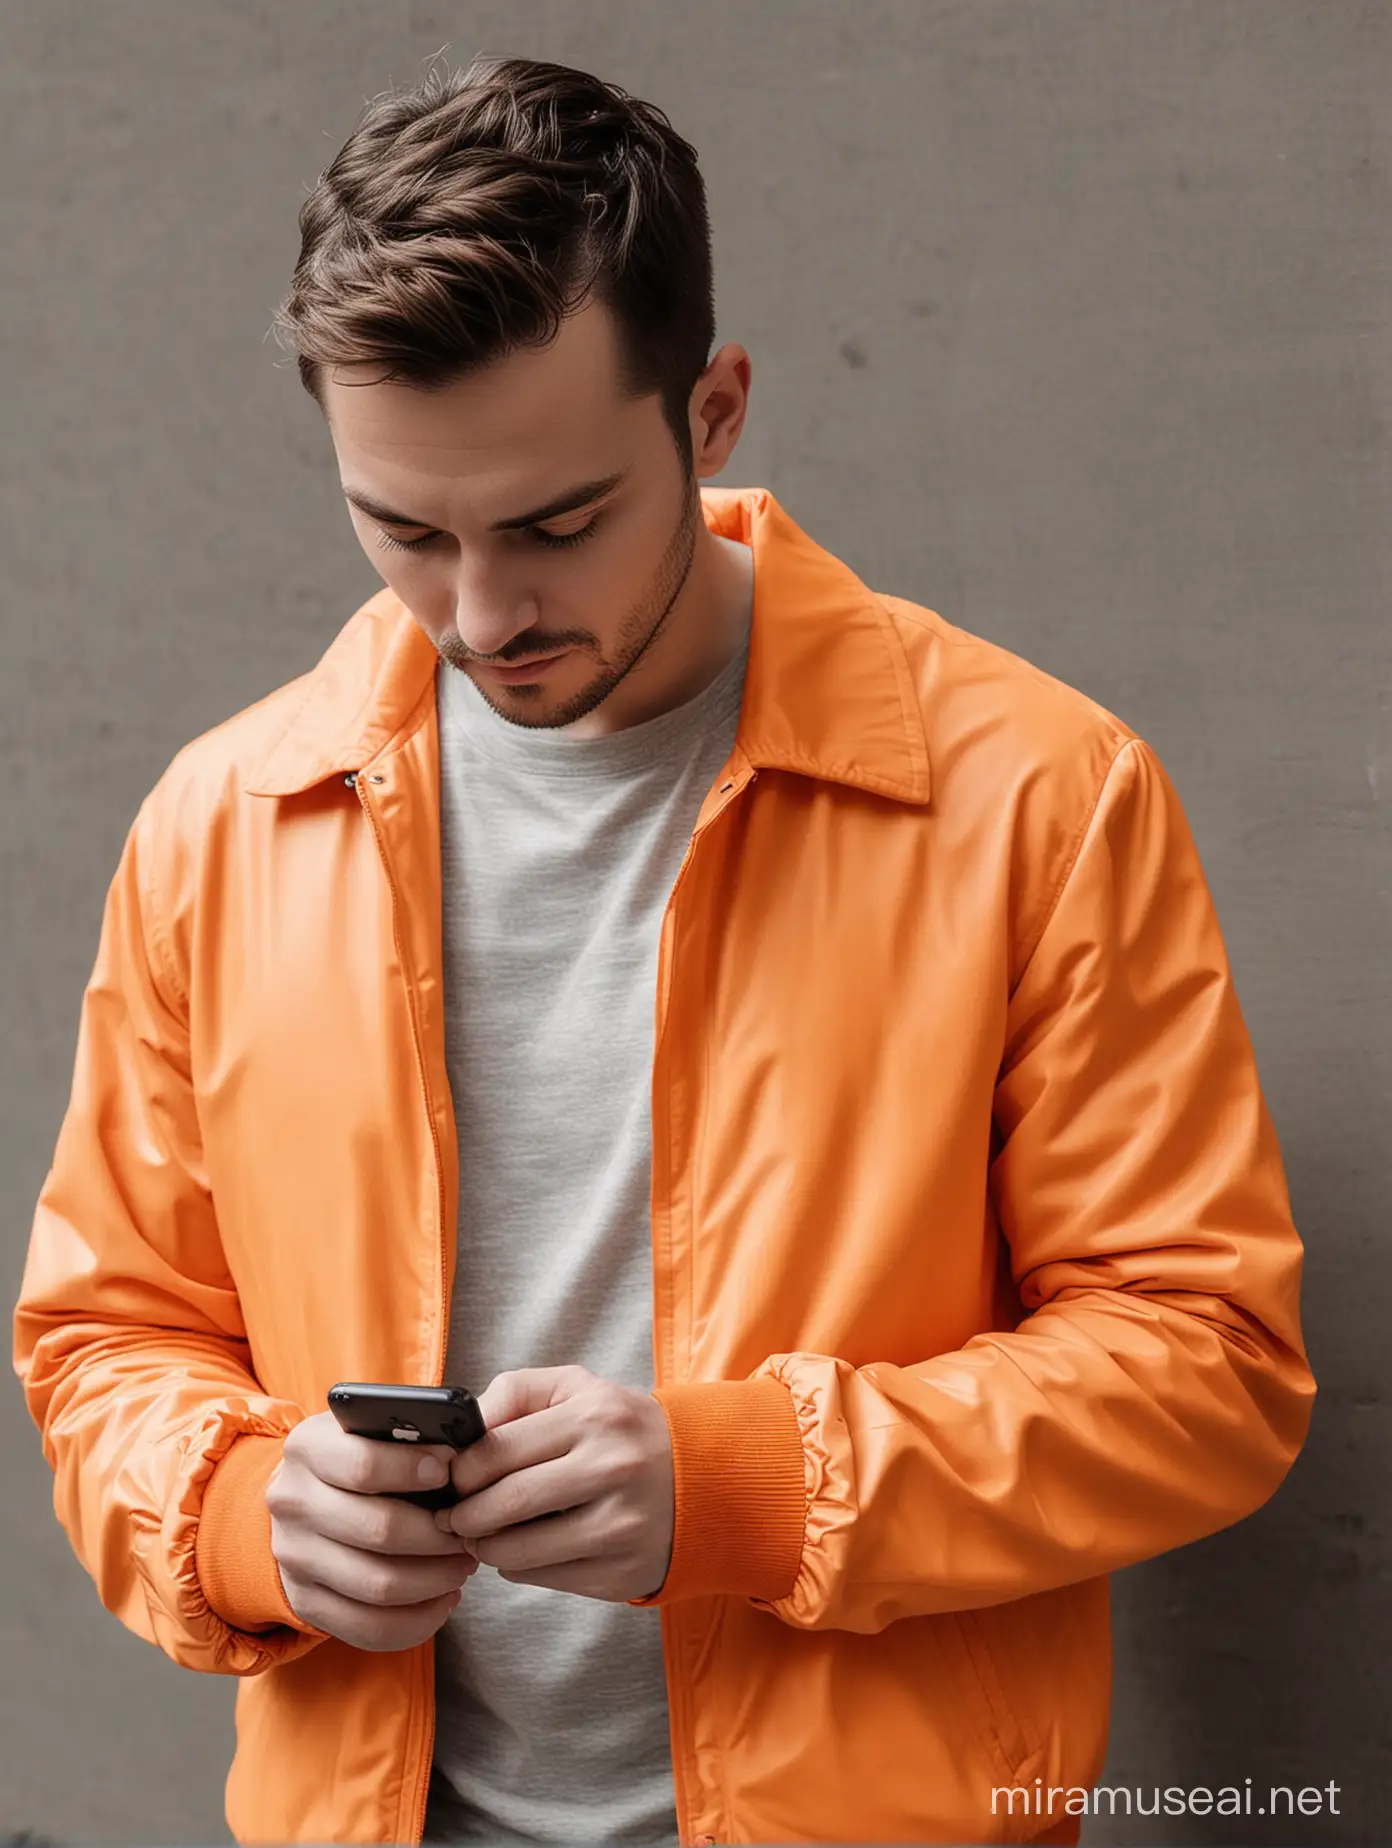 A man with an orange jacket is texting on his phone.